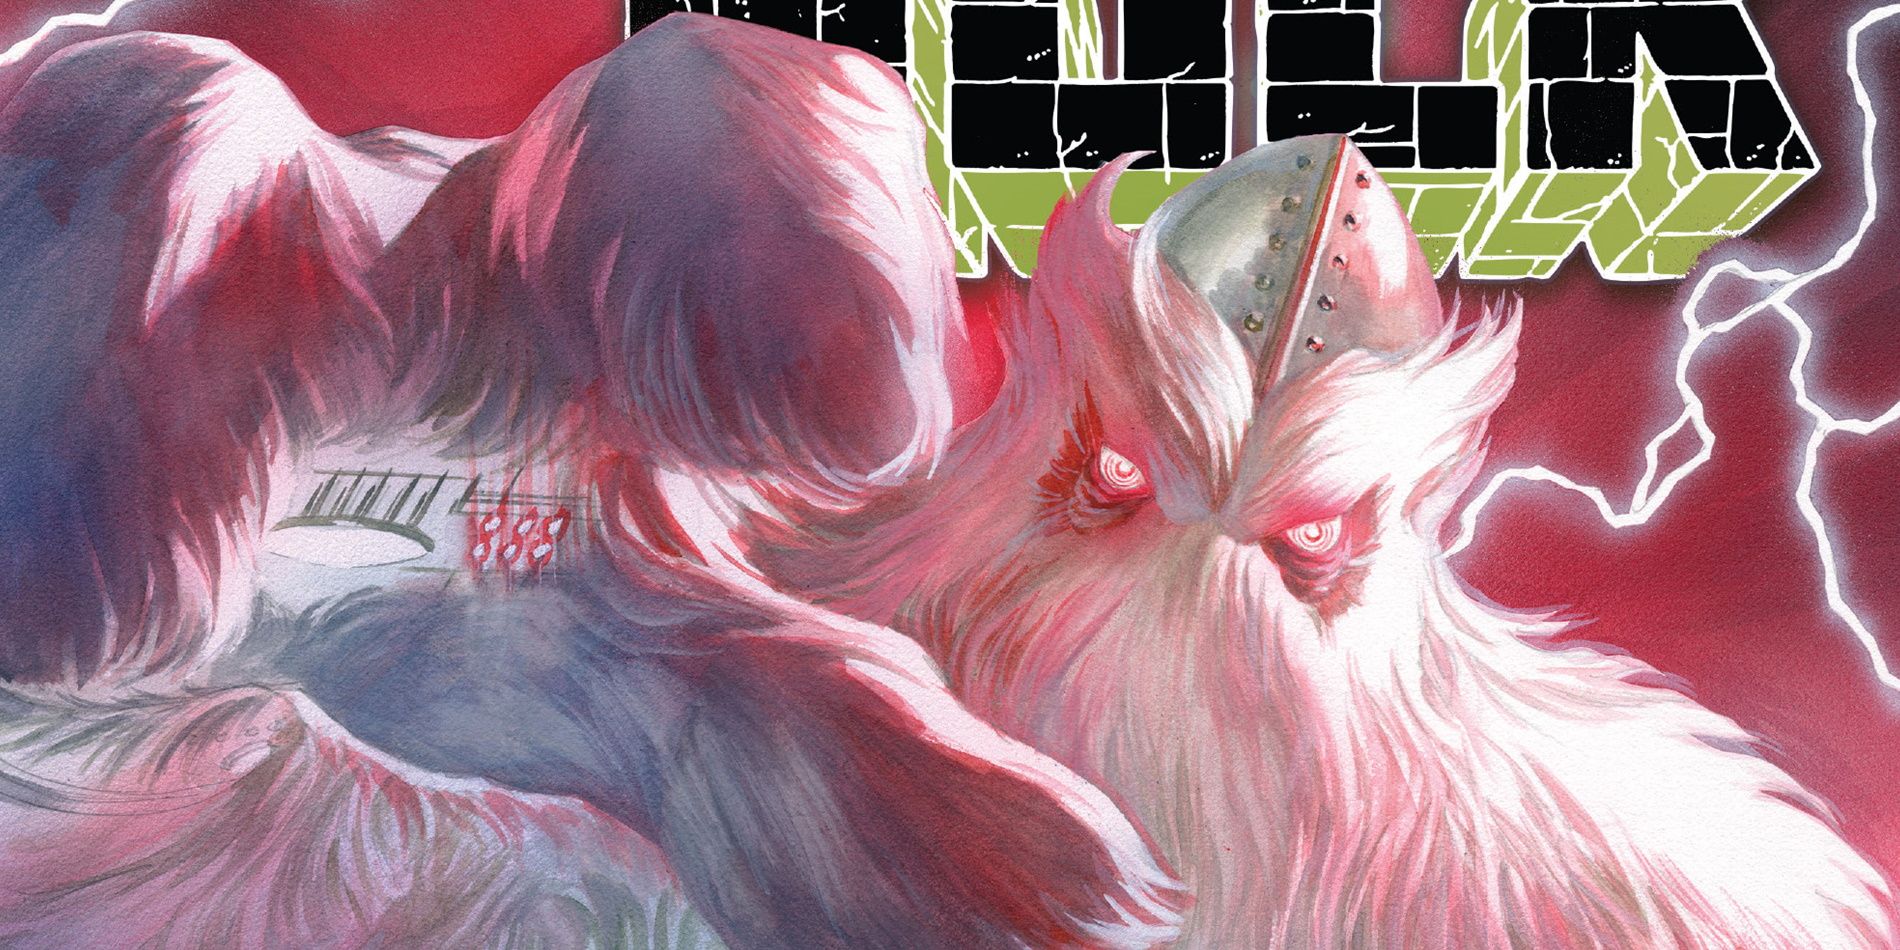 Xemnu reaching out. From the cover of Immortal Hulk #30.